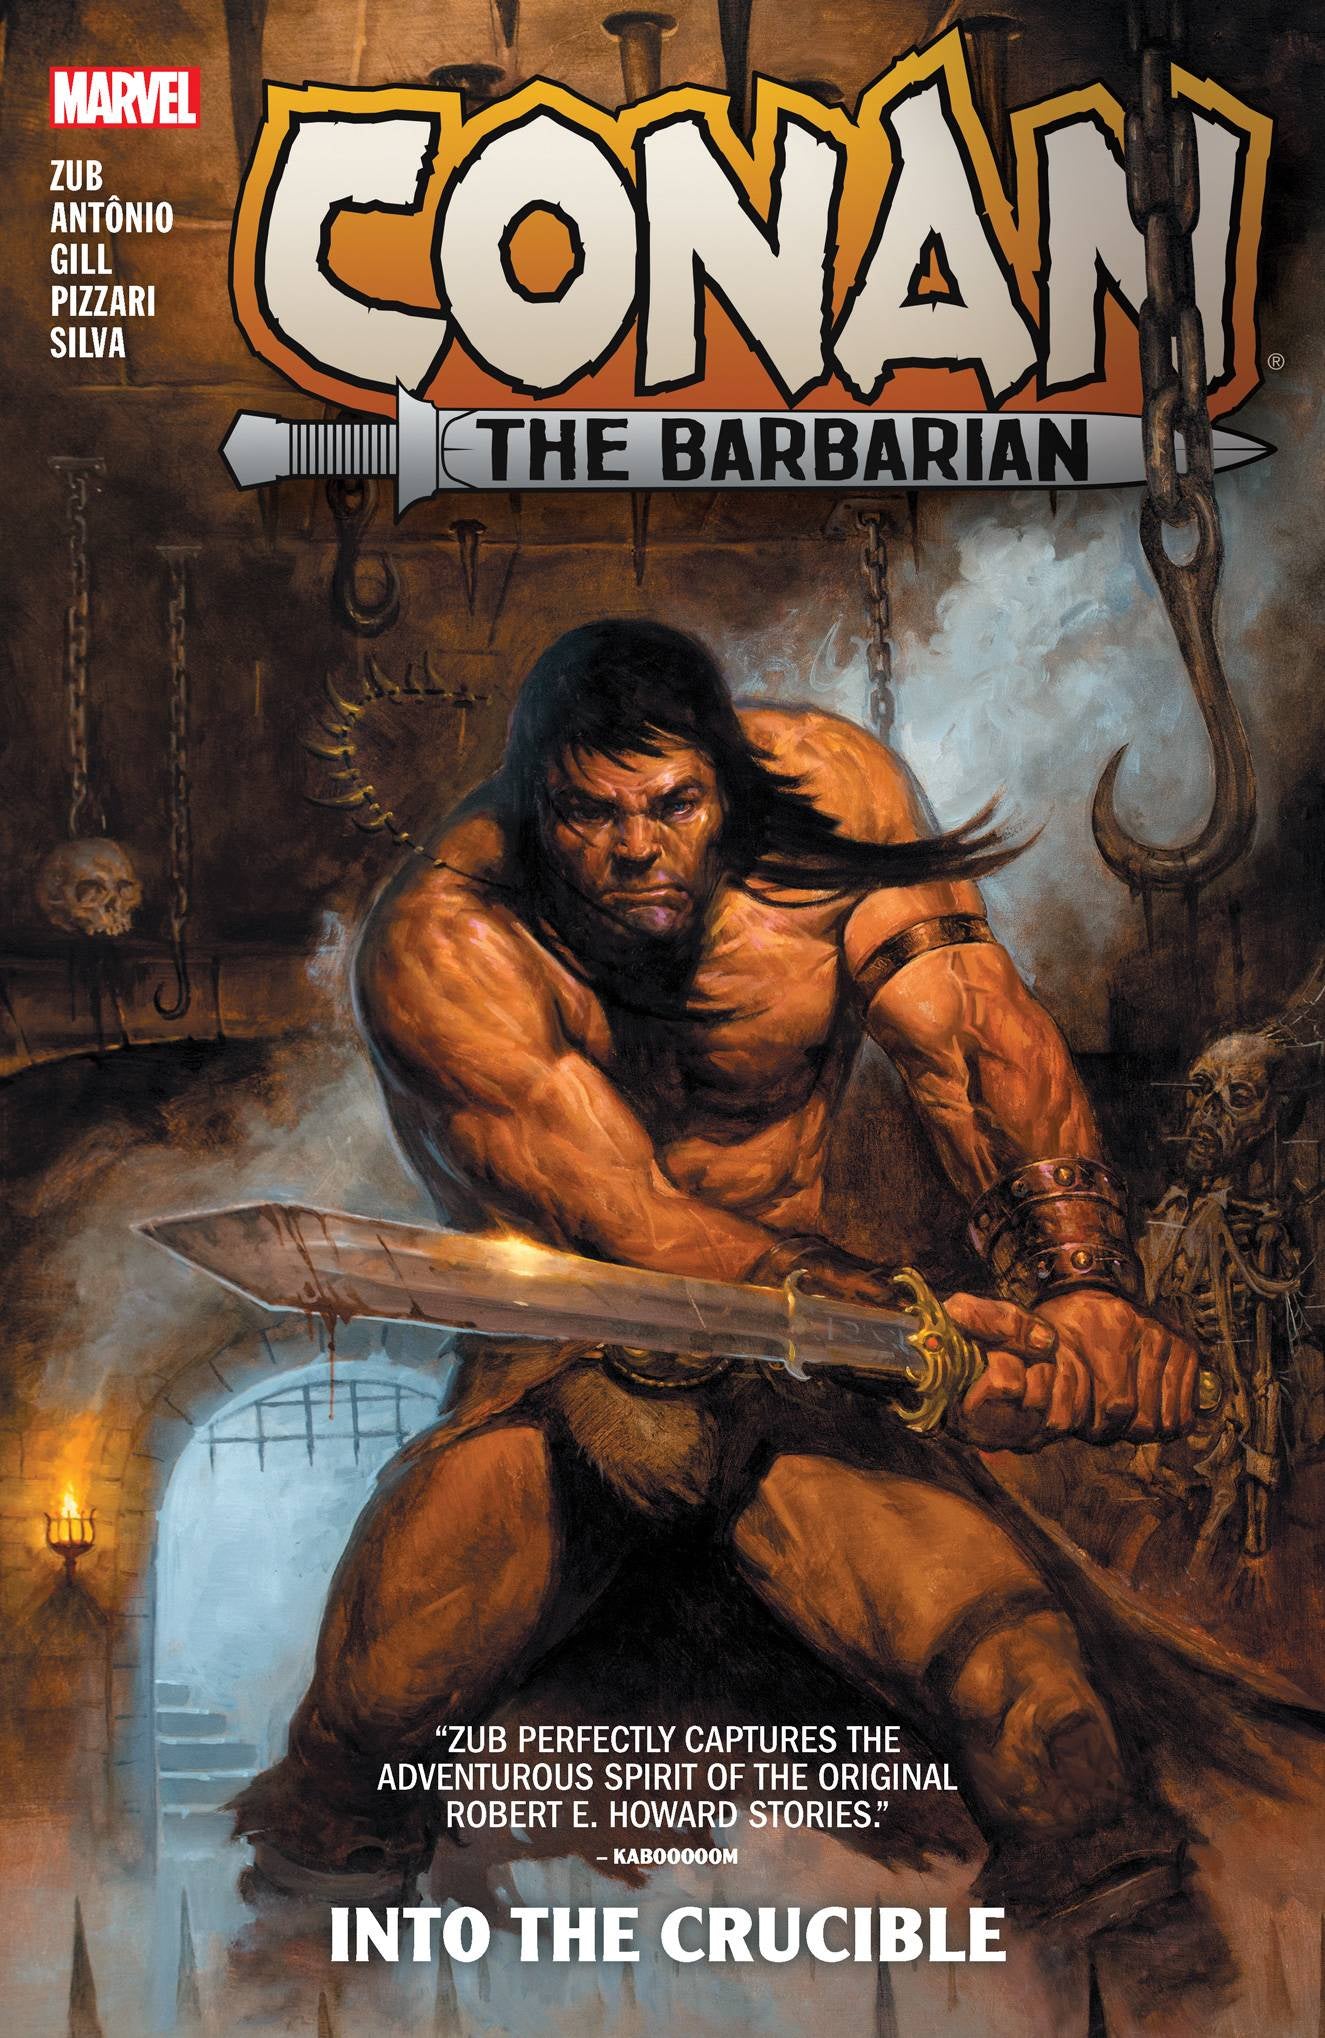 CONAN THE BARBARIAN BY JIM ZUB VOLUME 01 INTO THE CRUCIBLE